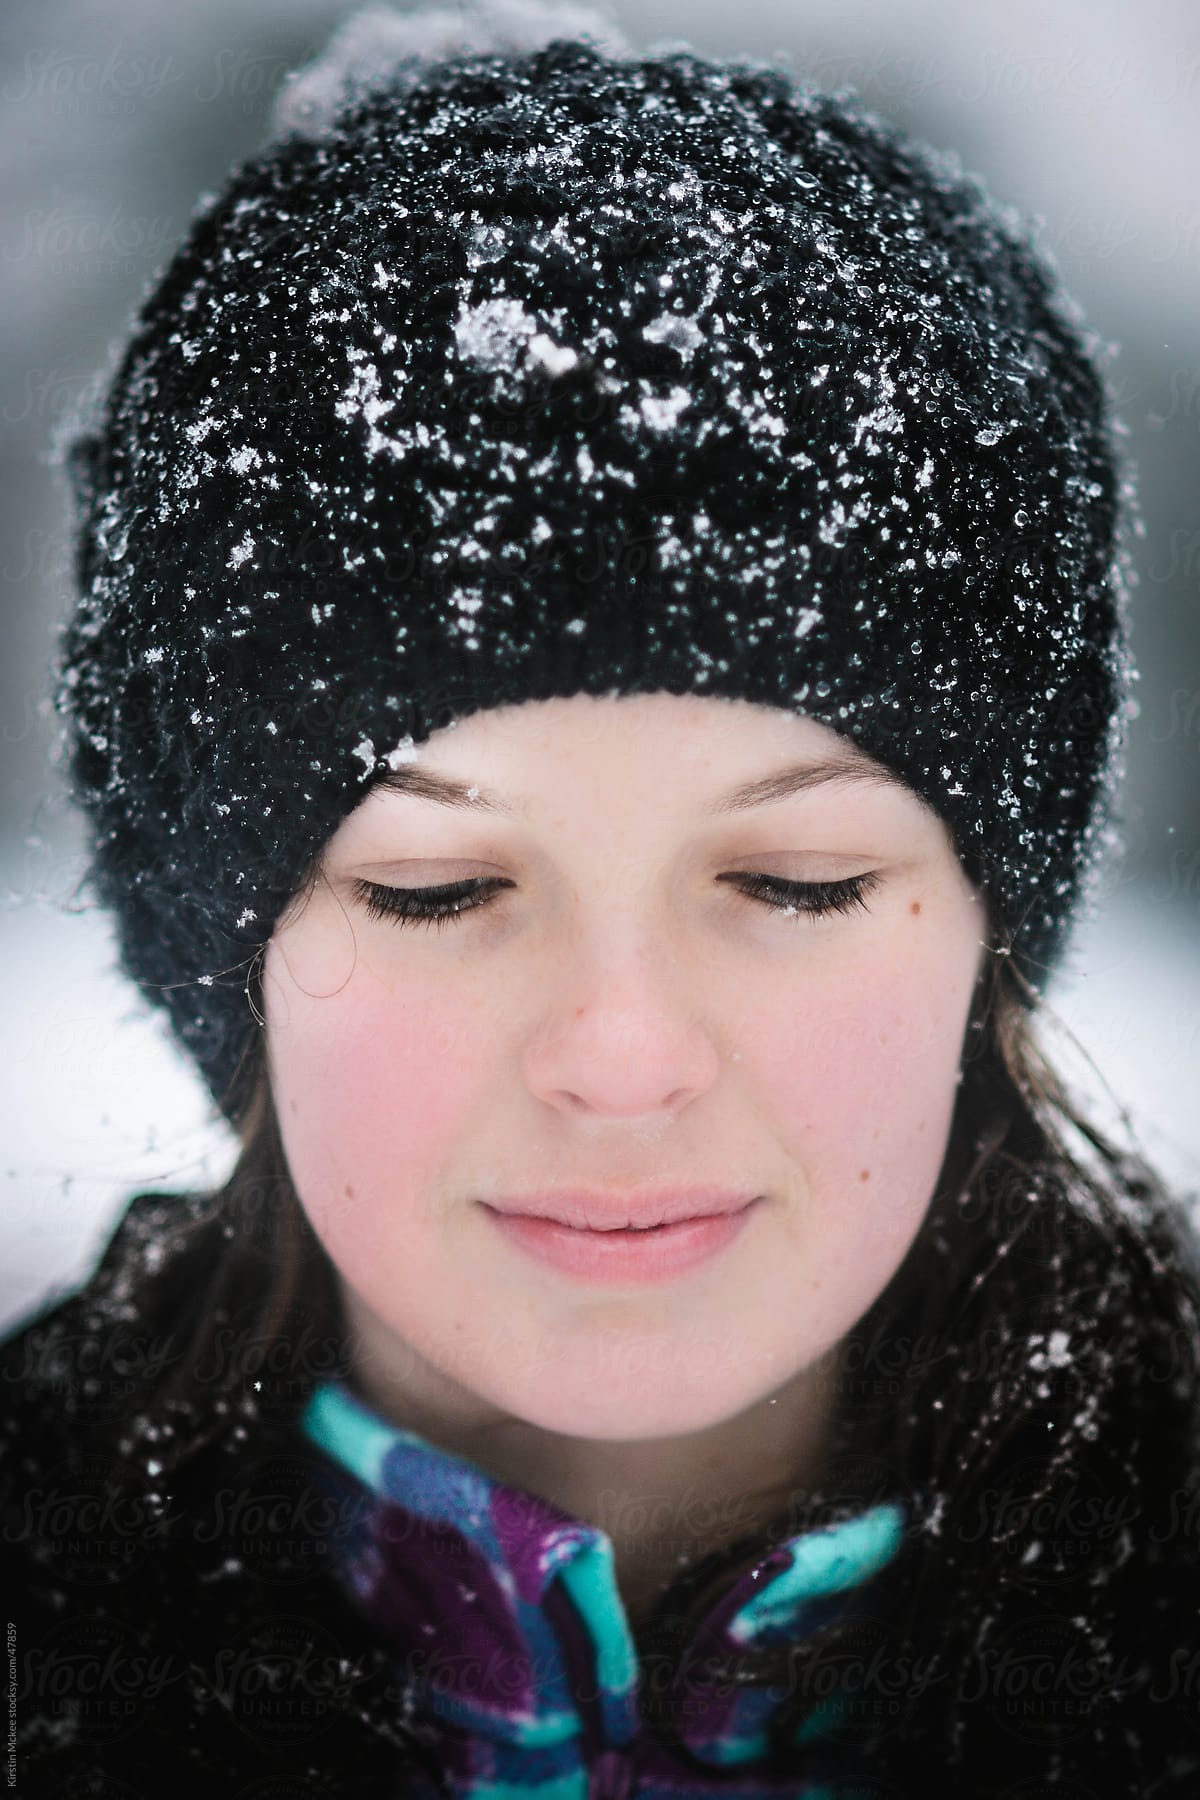 Caucasian girl with snow on her eyelashes.